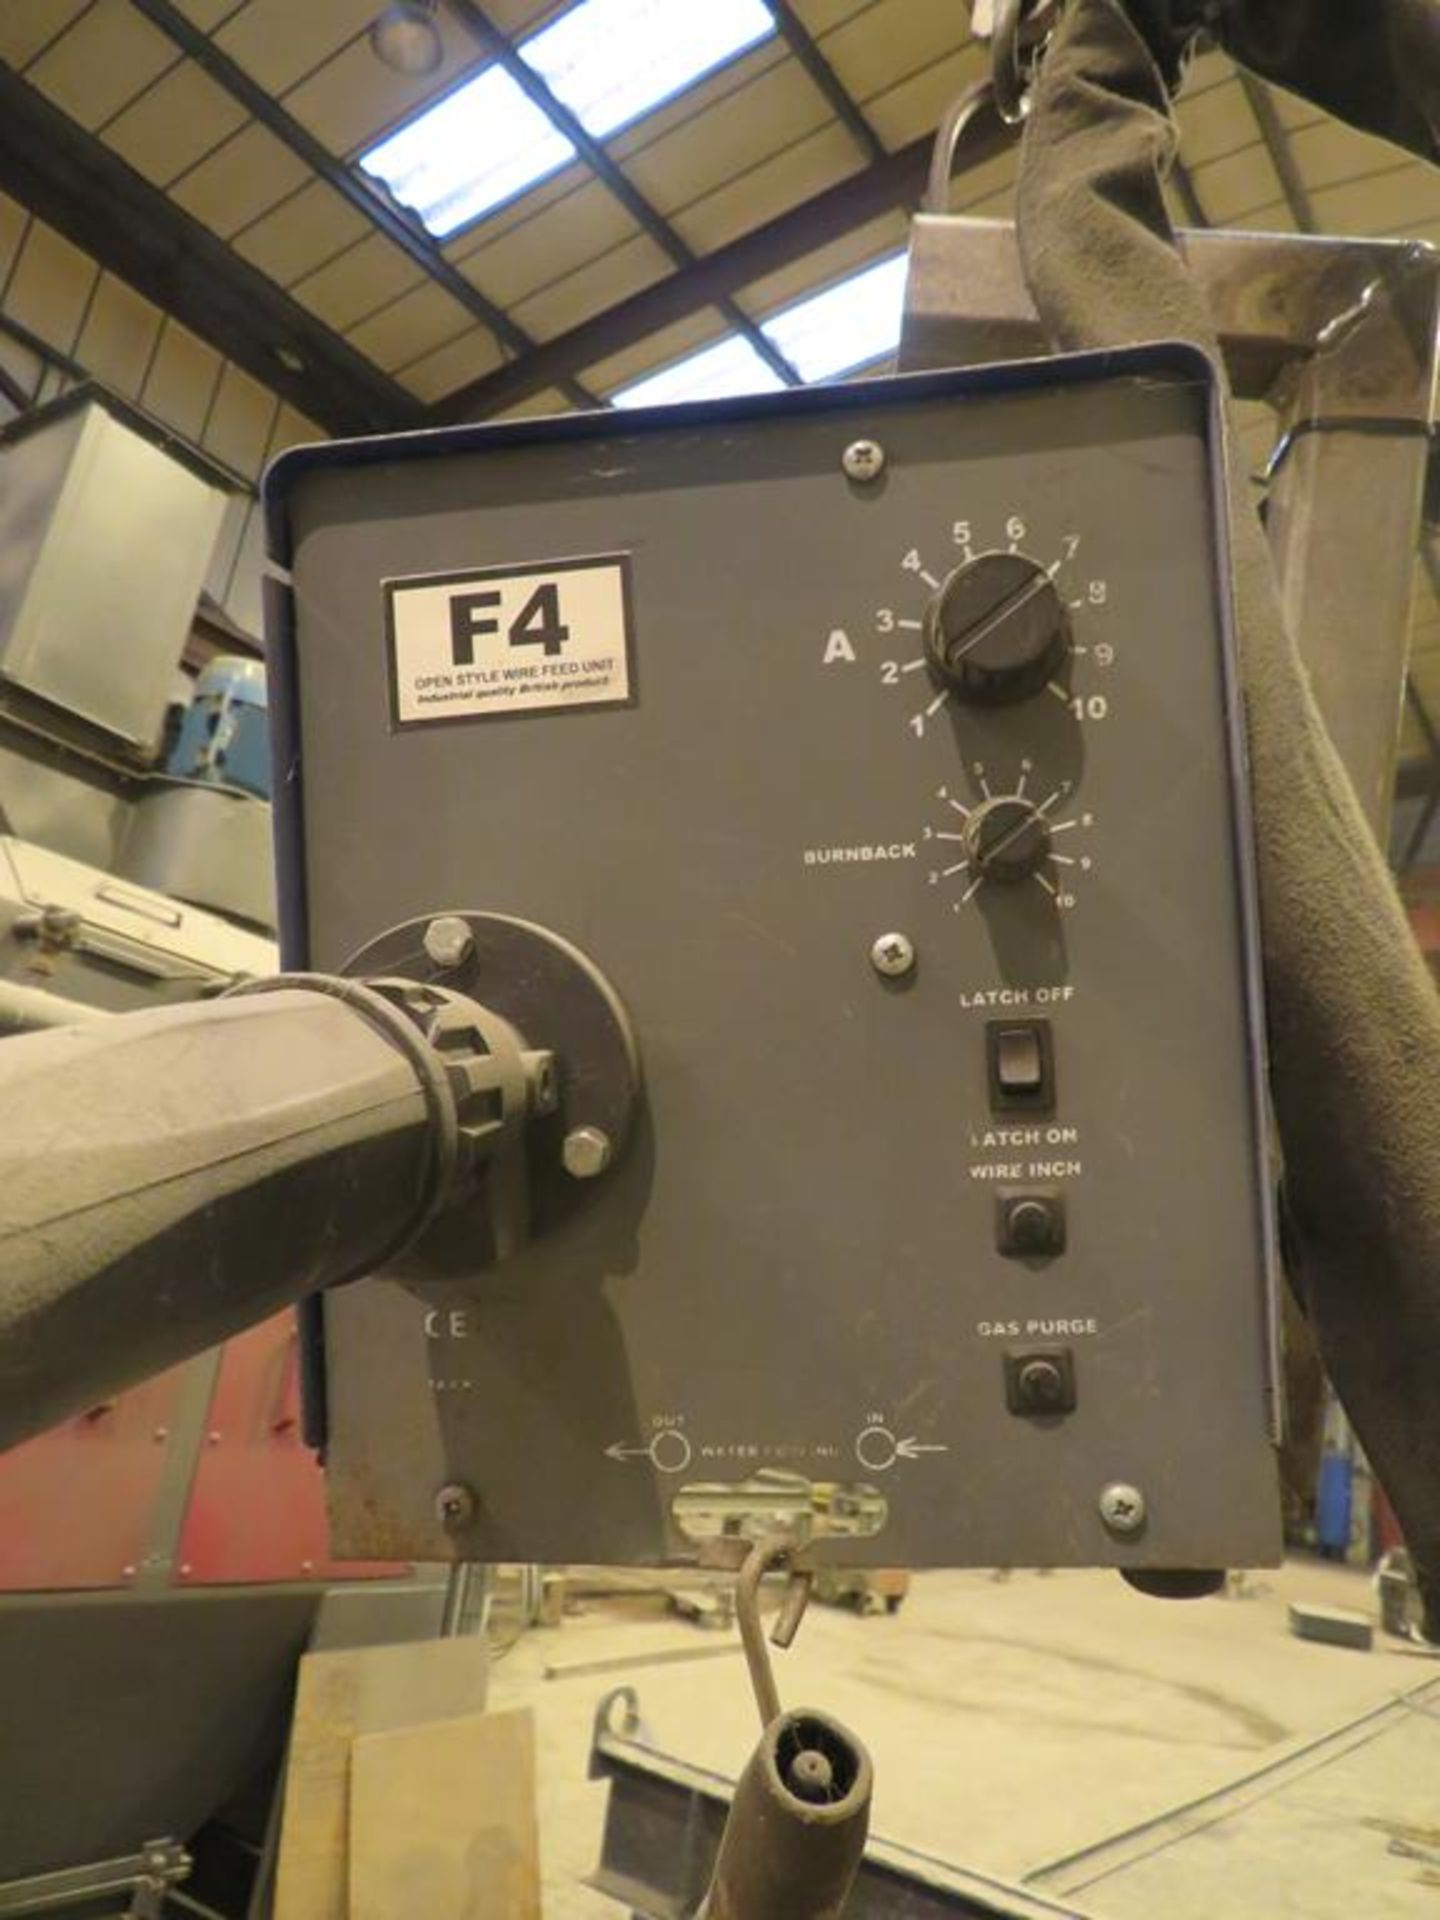 Tecarc SWF Mig 450S welder with F4 wire feed unit - Image 2 of 5